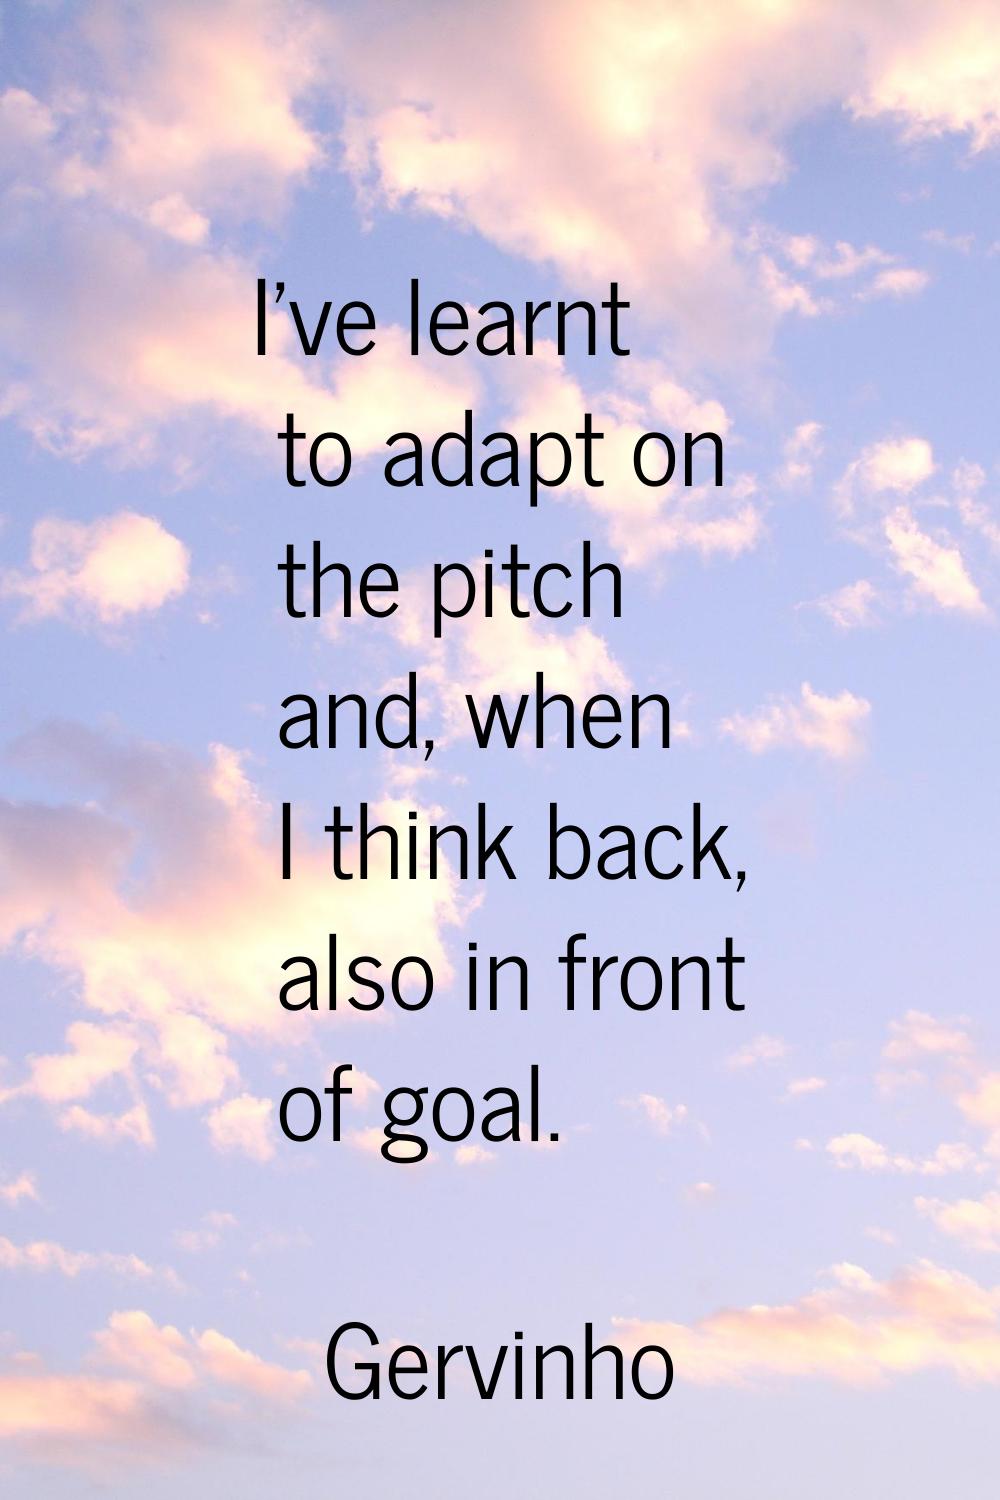 I've learnt to adapt on the pitch and, when I think back, also in front of goal.